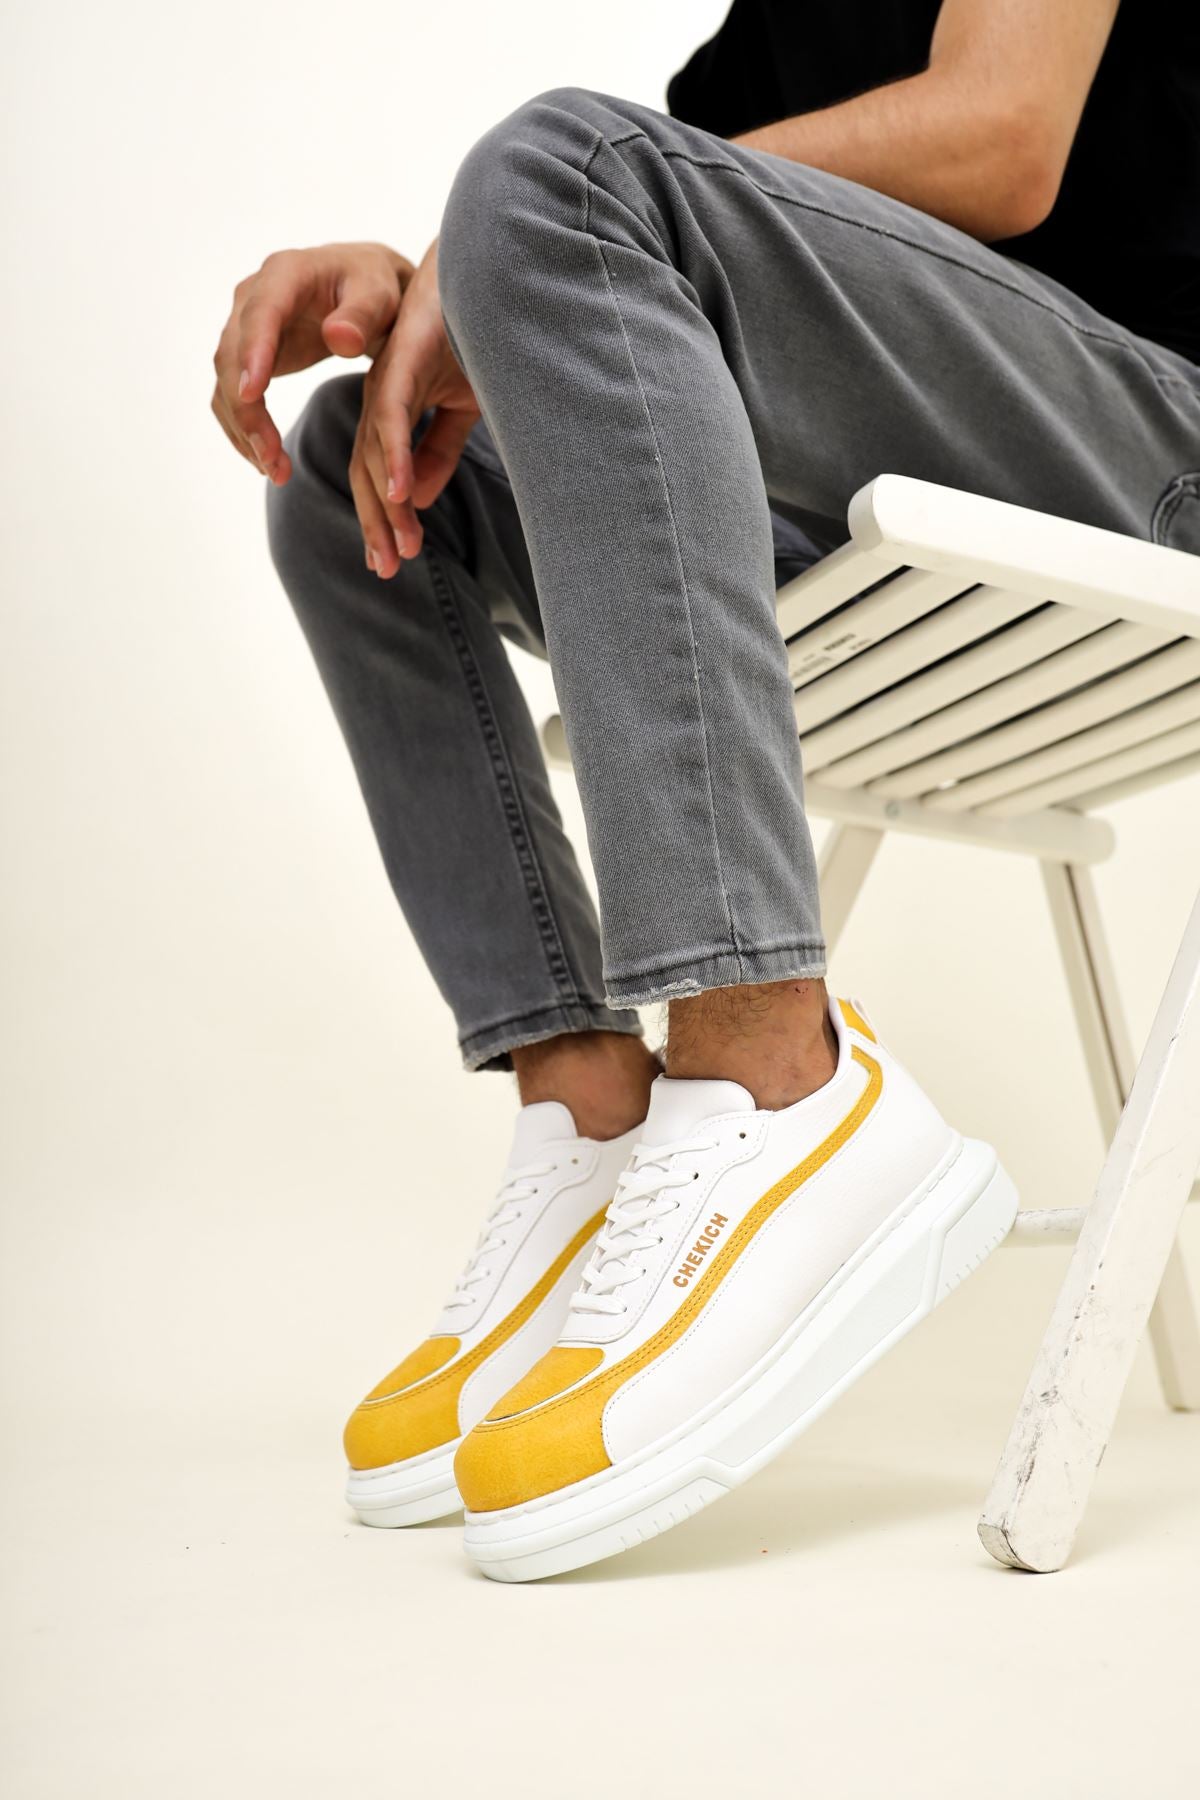 CH241 CBT Signature Line Up Men Sneaker Yellow/White